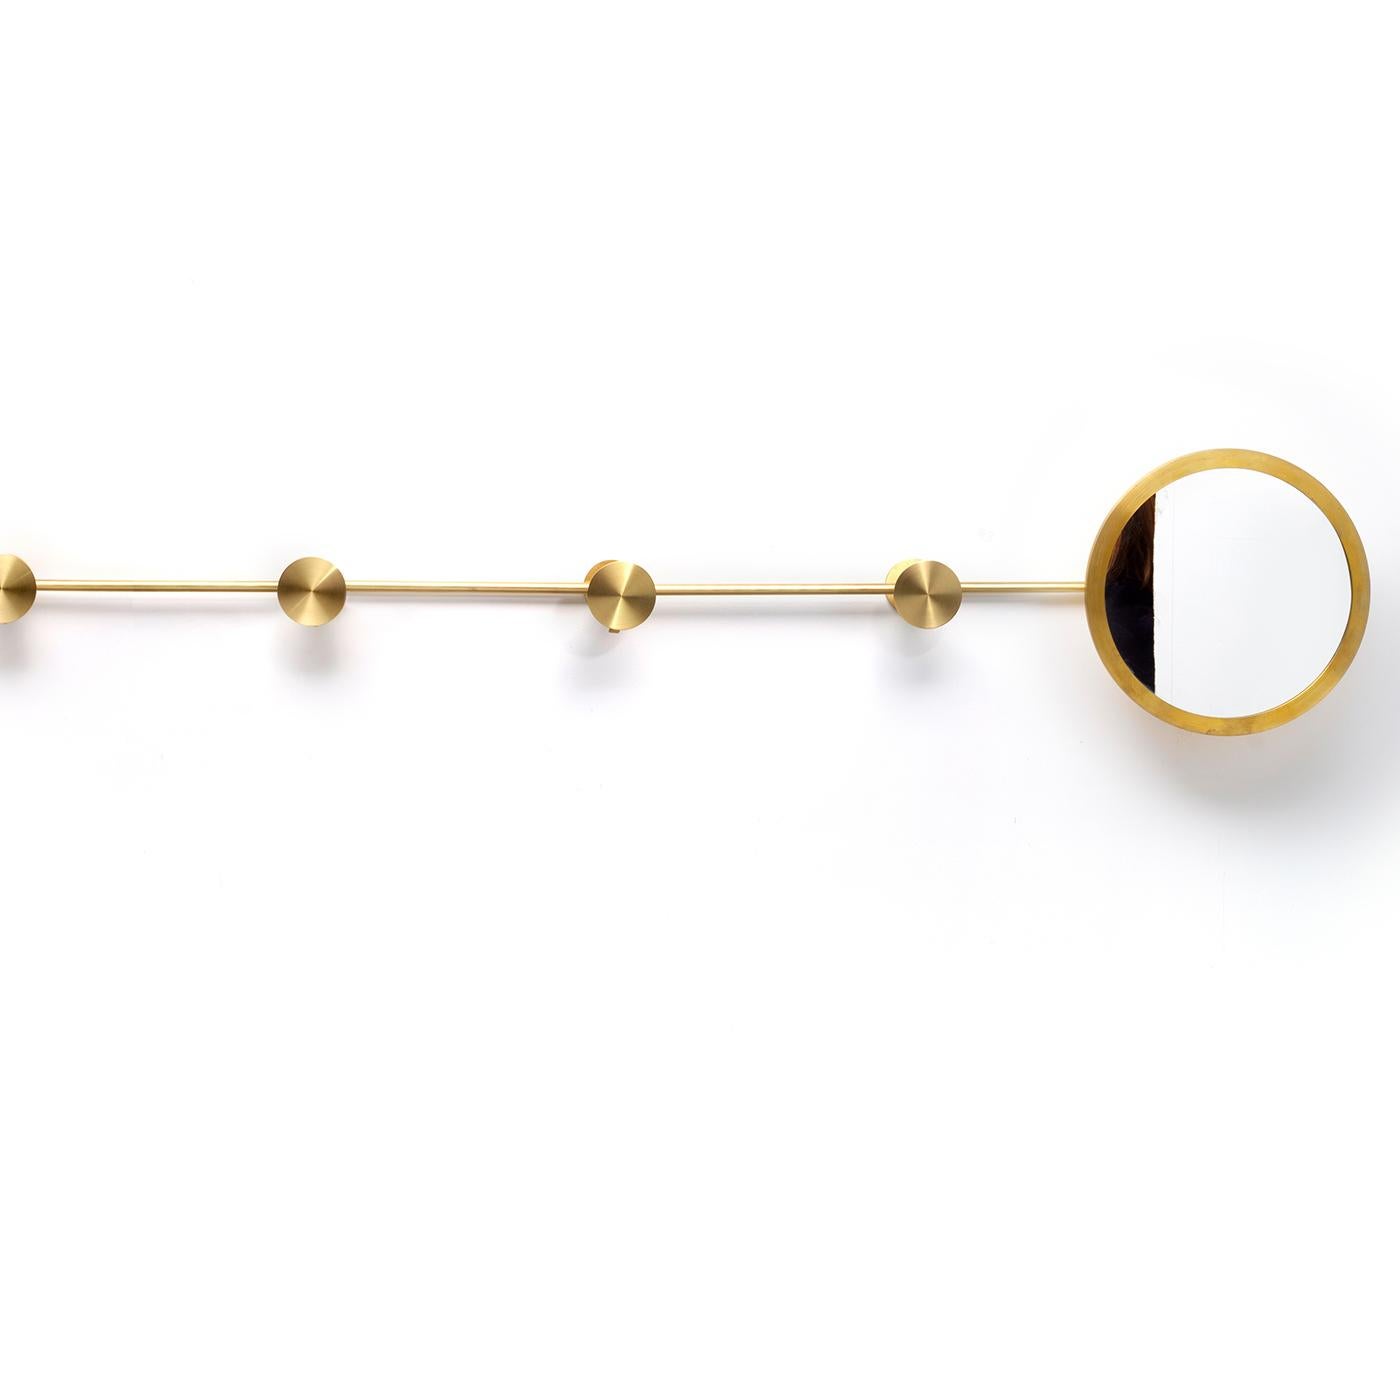 This unique coat rack with mirror features a satin brass structure with six knobs made of flat disks (6 cm) each concealing a hook and a round mirror, 25 cm in diameter, on one side. The linear structure is flexible and can be displayed in a